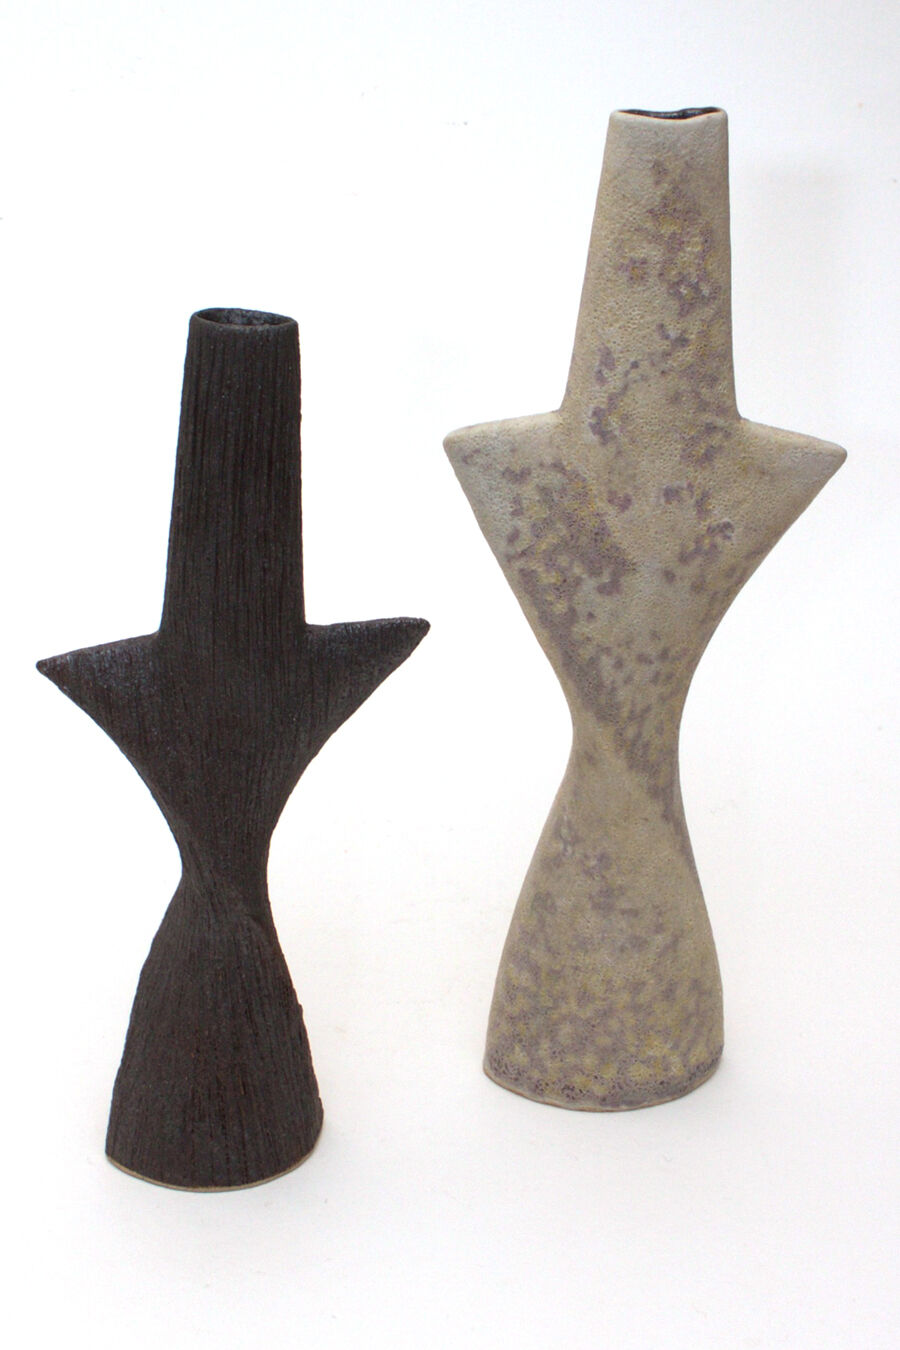 Pair of ceramic twisting totemic forms by Chris Carter